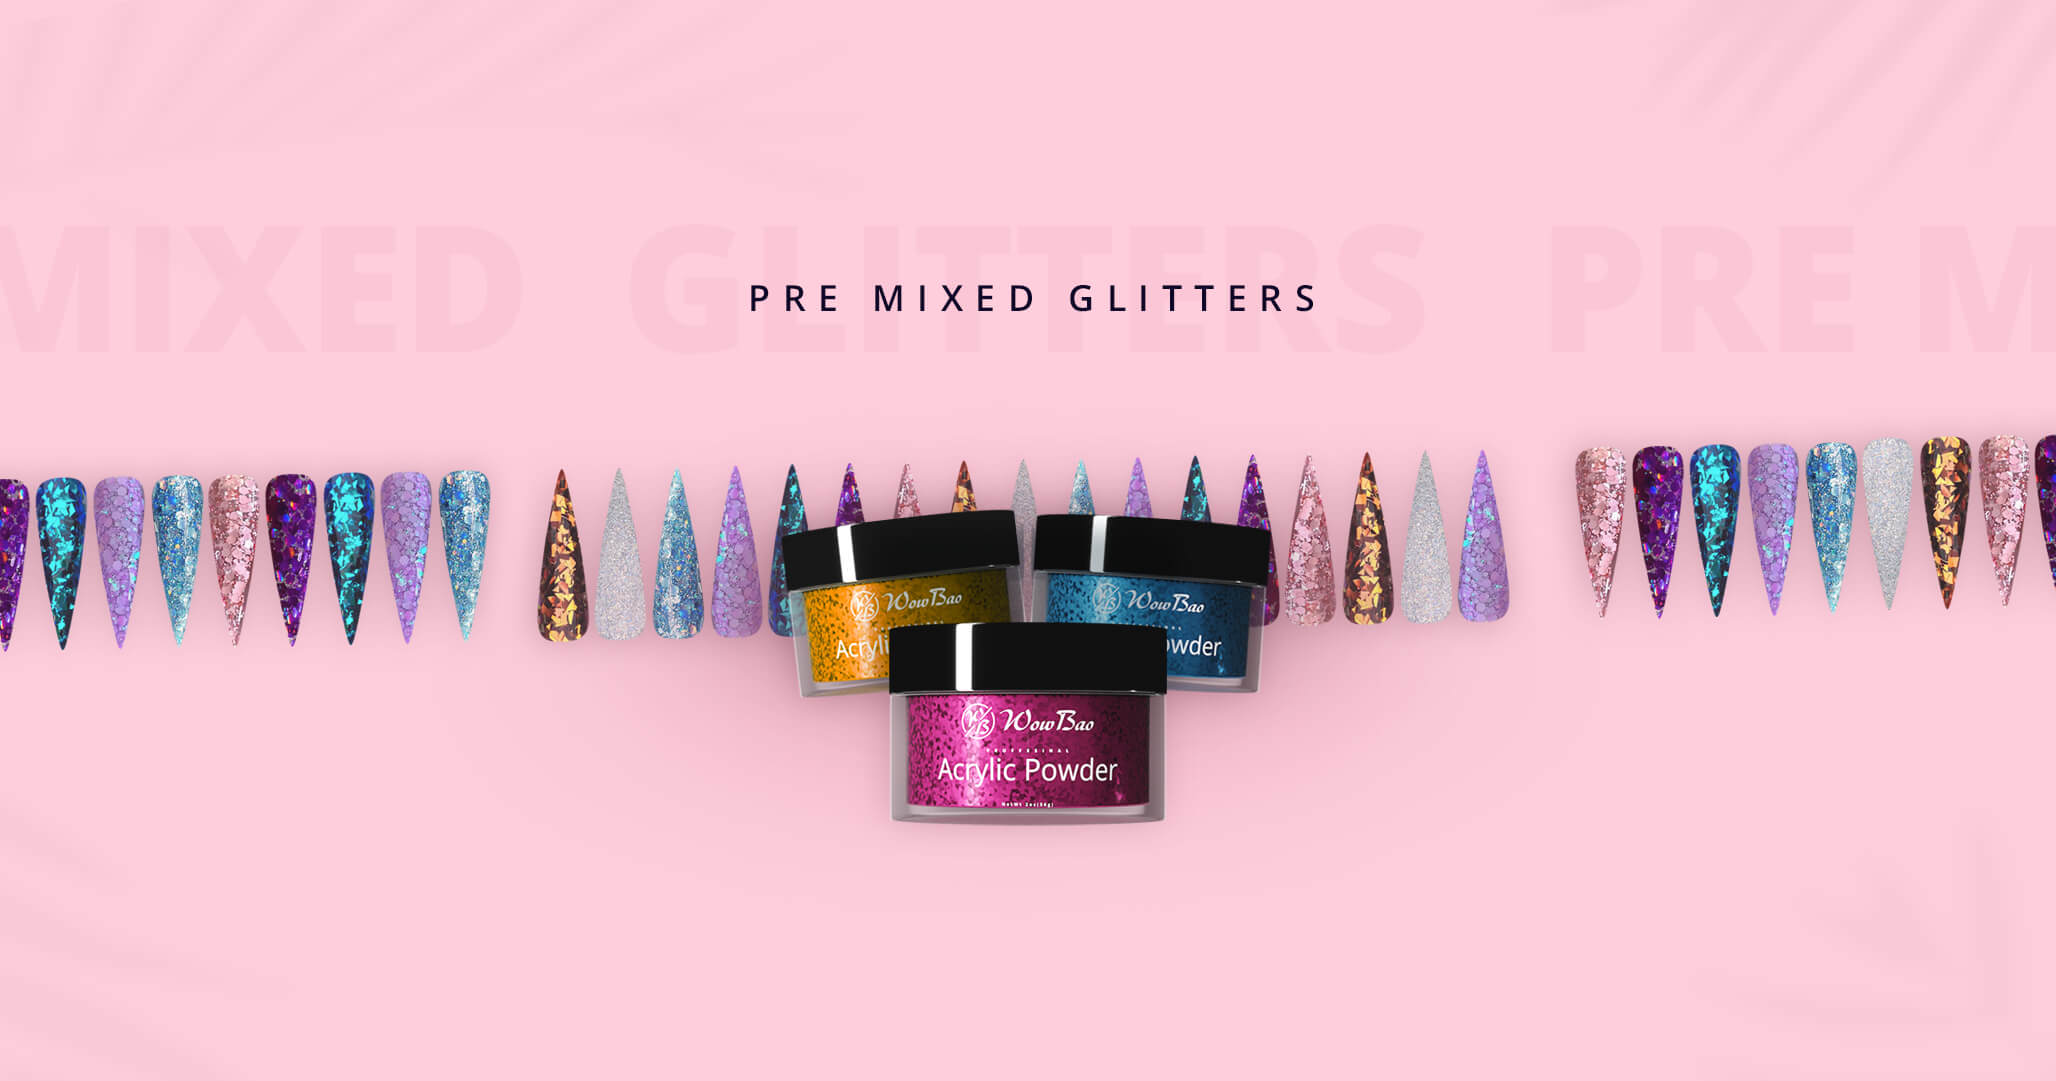 Mia Secret - Glitter Collections. If you want the best